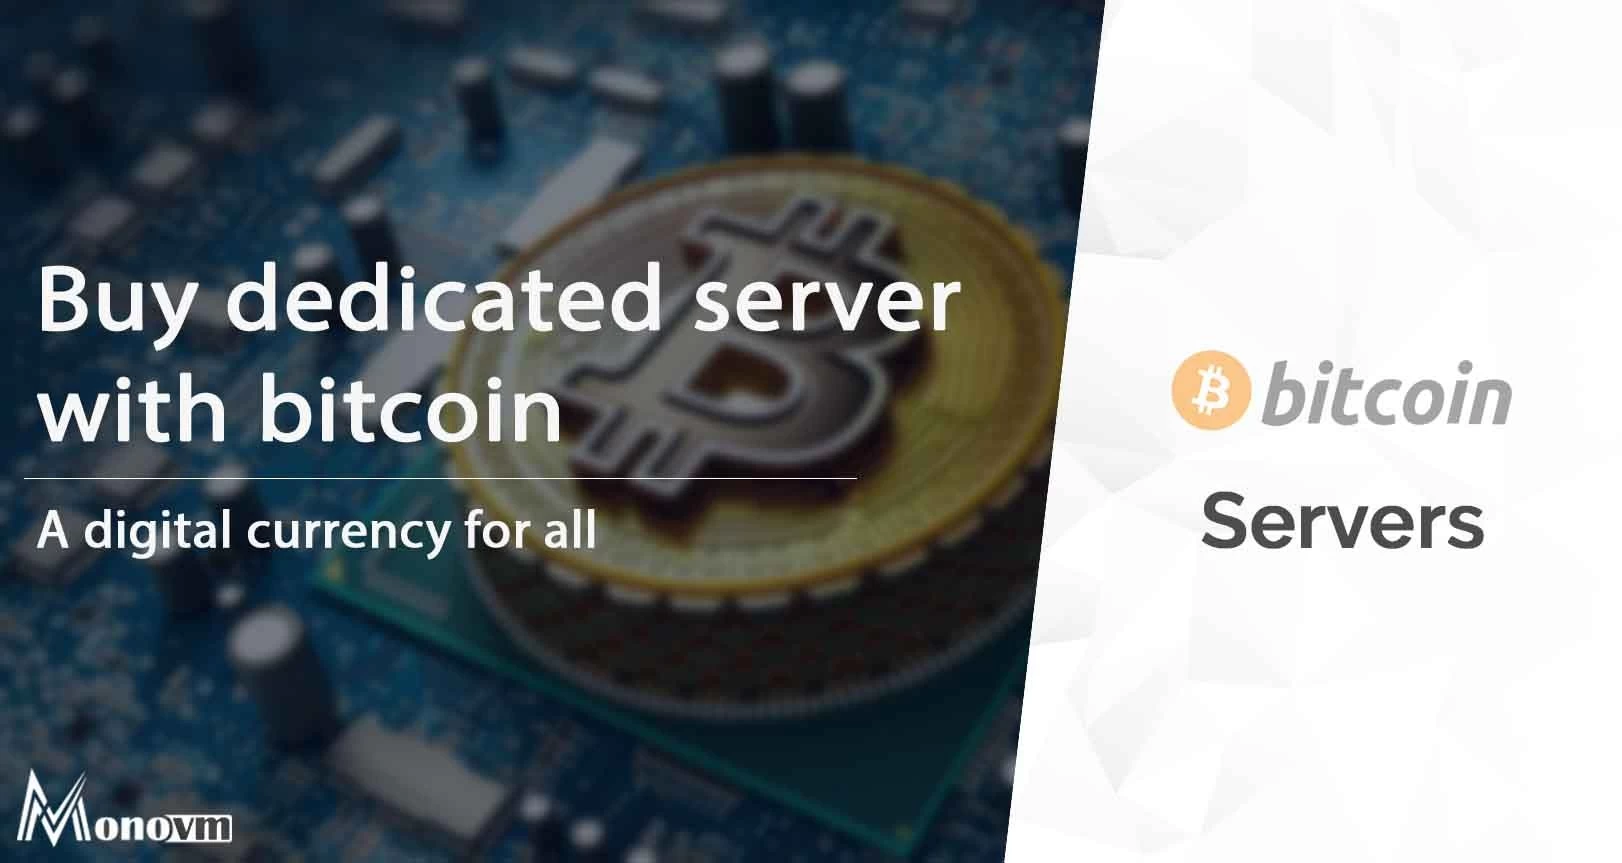 How to Buy Dedicated Server with Bitcoin? [Complete guide]